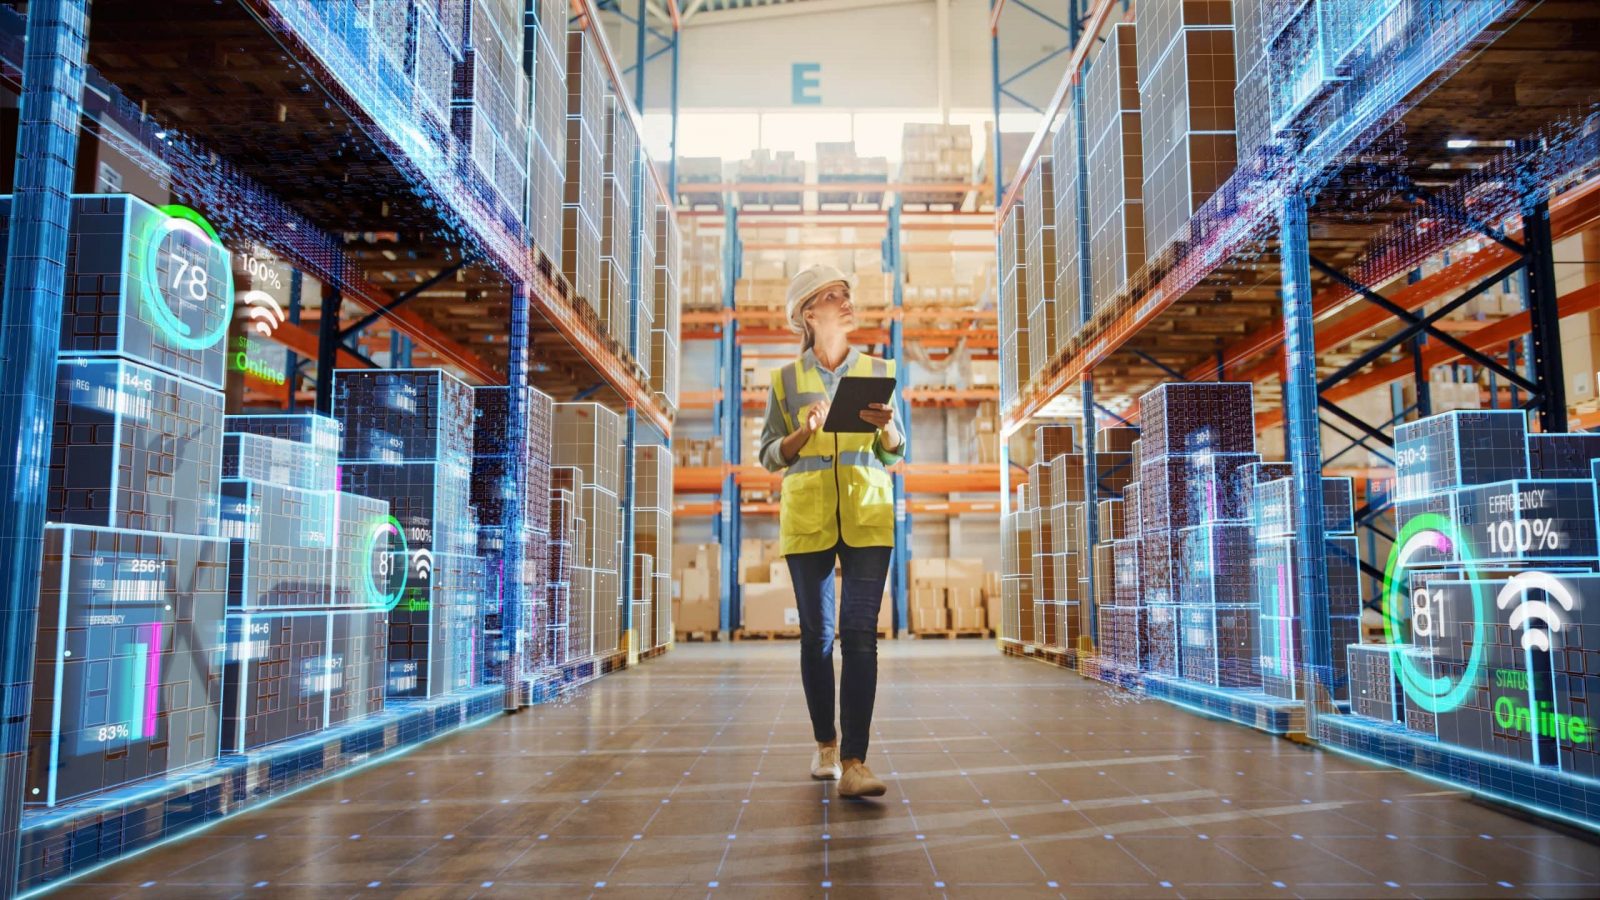 Futuristic Technology Retail Warehouse: Worker Doing Inventory W